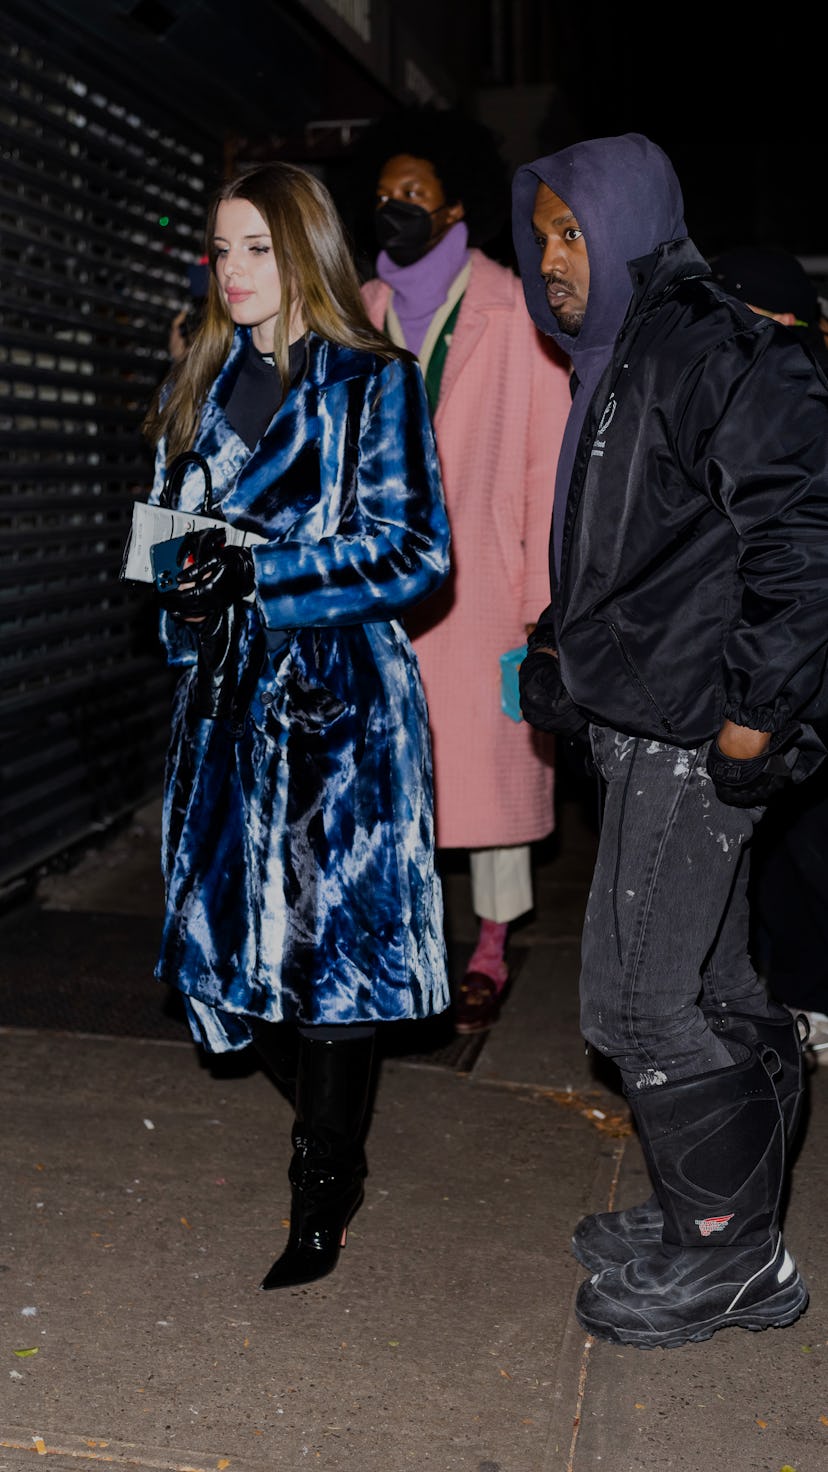 NEW YORK, NEW YORK - JANUARY 04: Julia Fox (L) and Kanye West are seen in Greenwich Village on Janua...